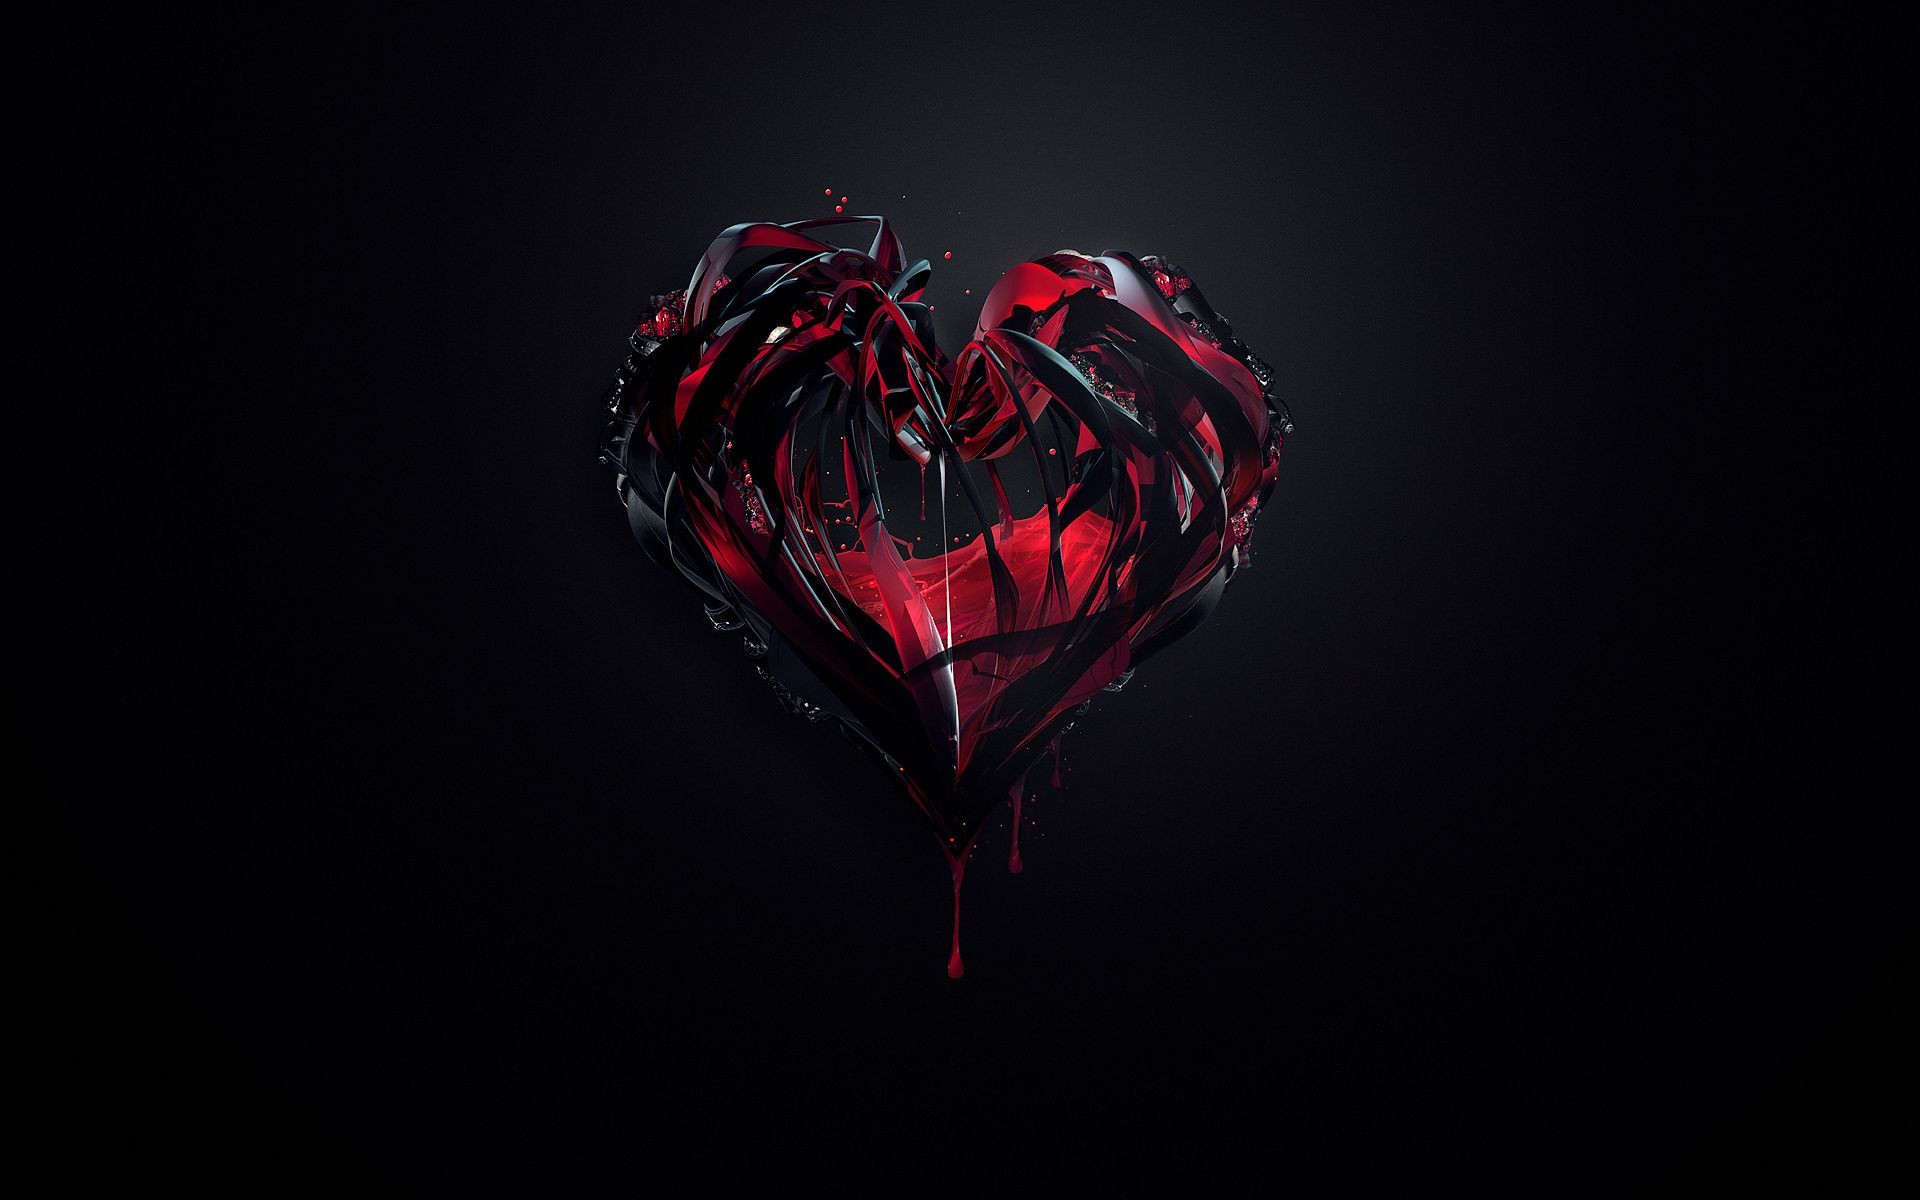 1920x1200 Red and black heart on a black background wallpaper